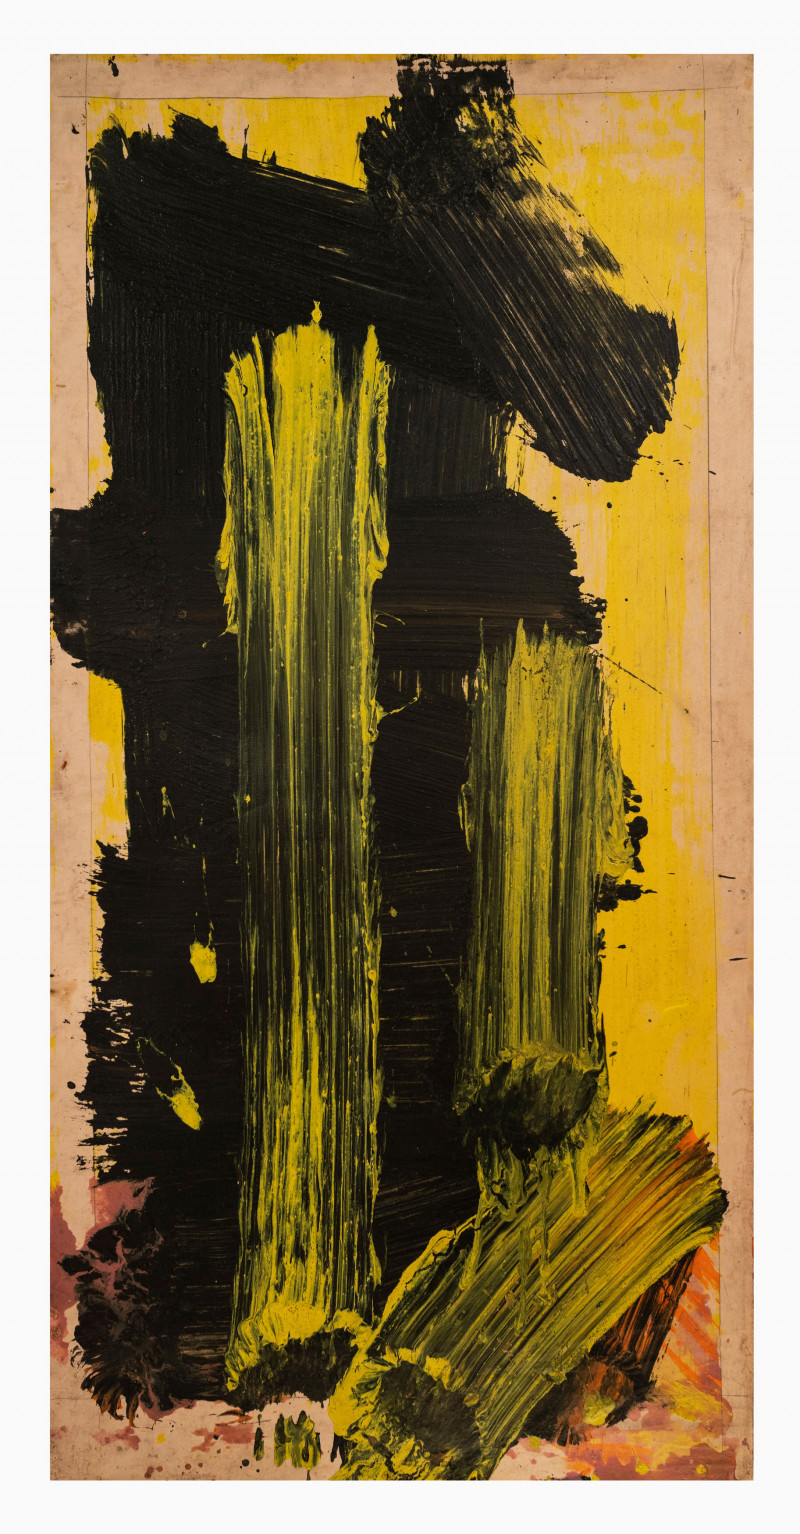 Edvins Strautmanis - Untitled (Composition in yellow and black)